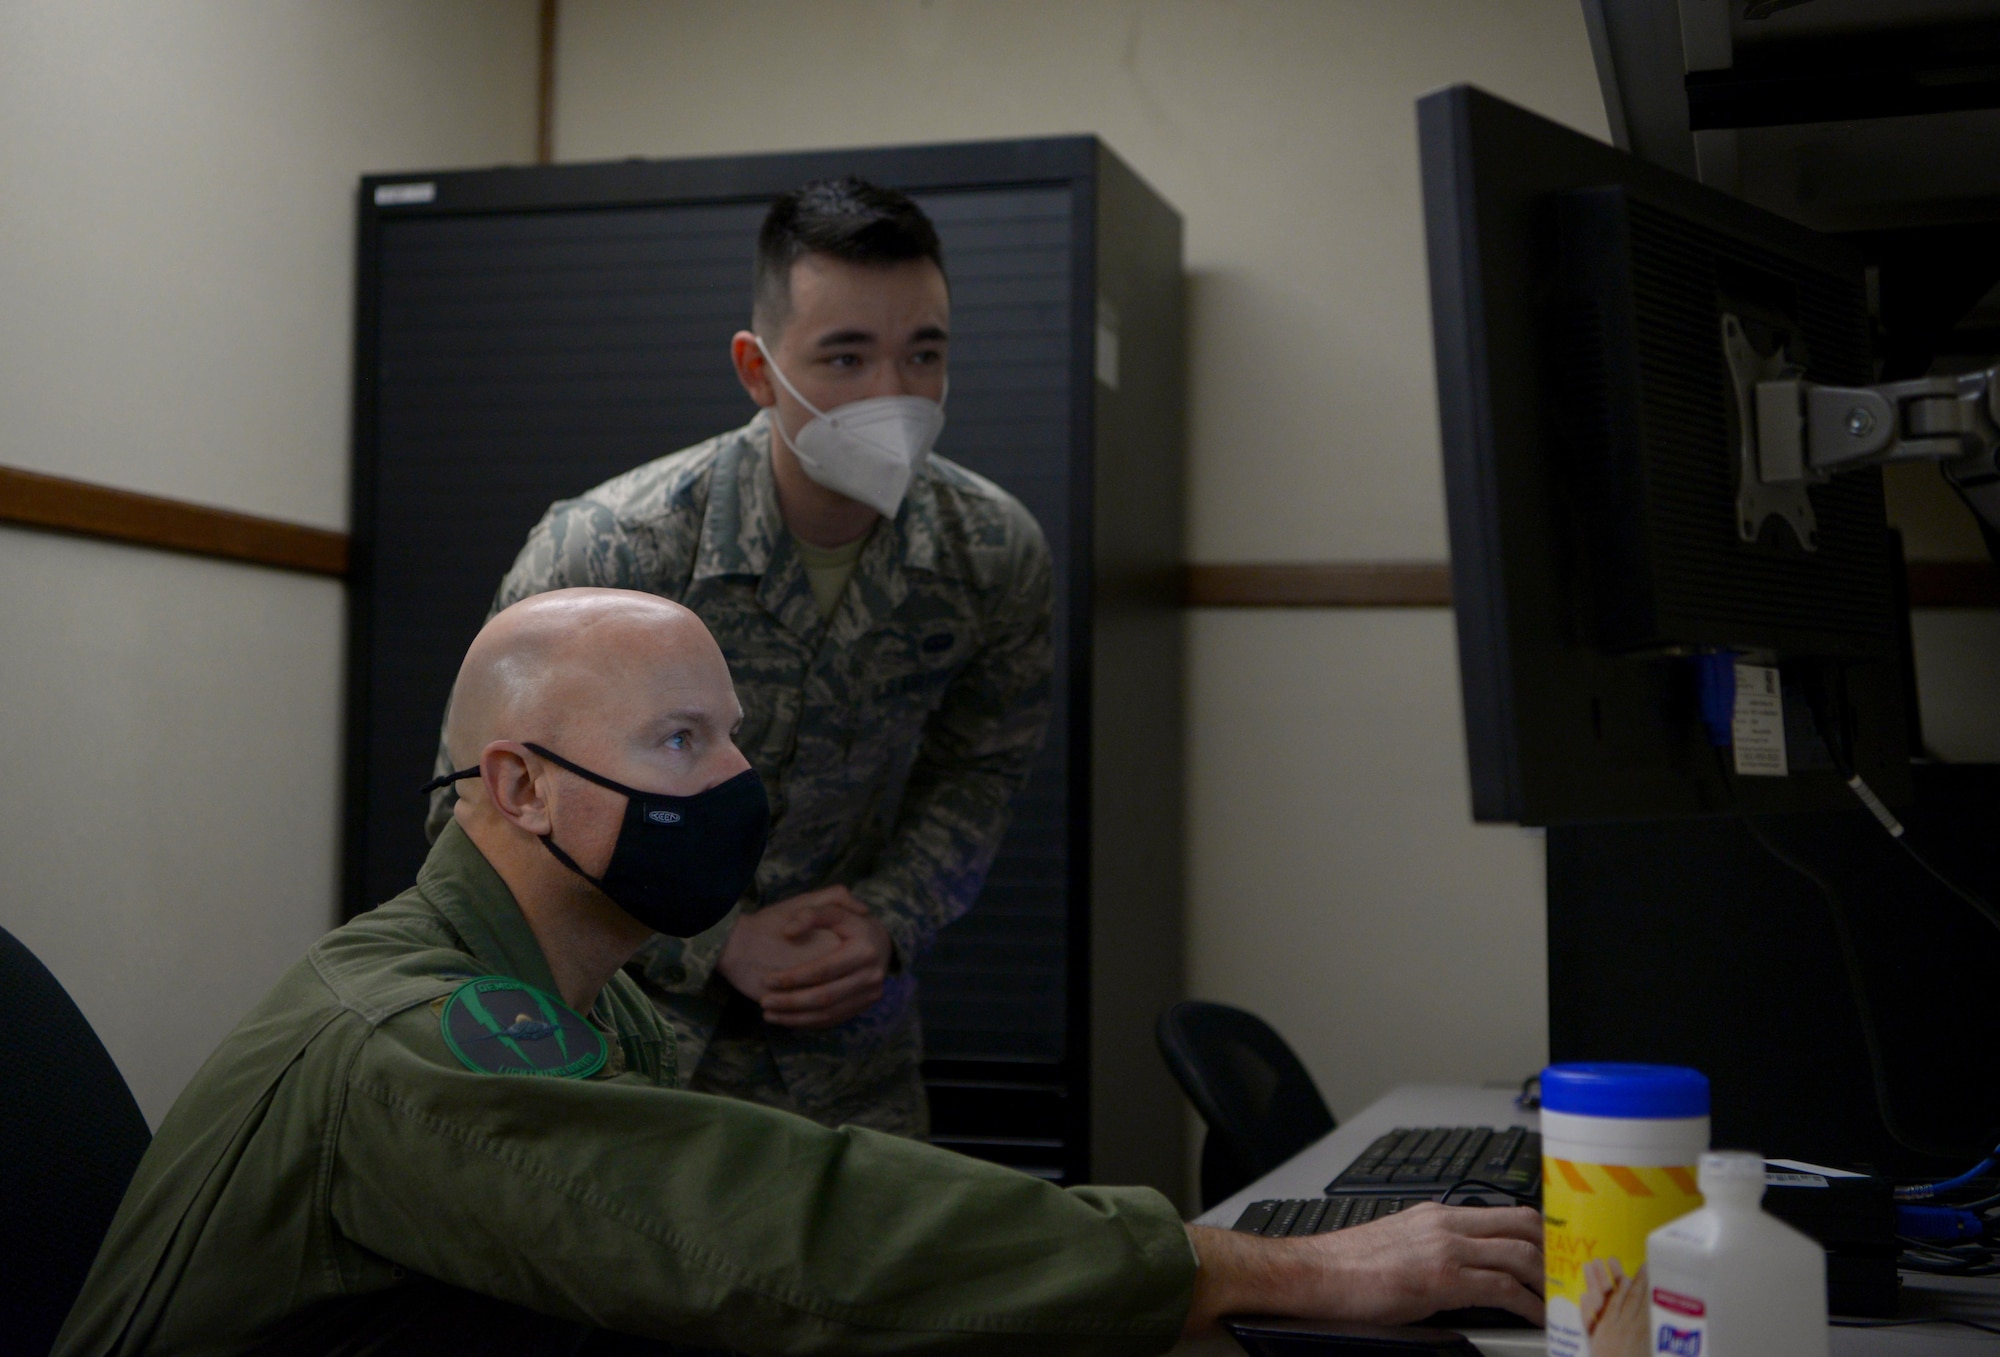 U.S. Air Force Airman 1st Class Jared Clark, a 354th Communications Squadron (CS) client systems technician, teaches Col. David Berkland, the 354th Fighter Wing (FW) commander, how to mitigate network vulnerabilities on Eielson Air Force Base, Alaska, Sept. 29, 2020. The 354th CS manages, operates, maintains and provides communications to support the 354th FW’s combat and support missions. (U.S. Air Force photo by Senior Airman Beaux Hebert)